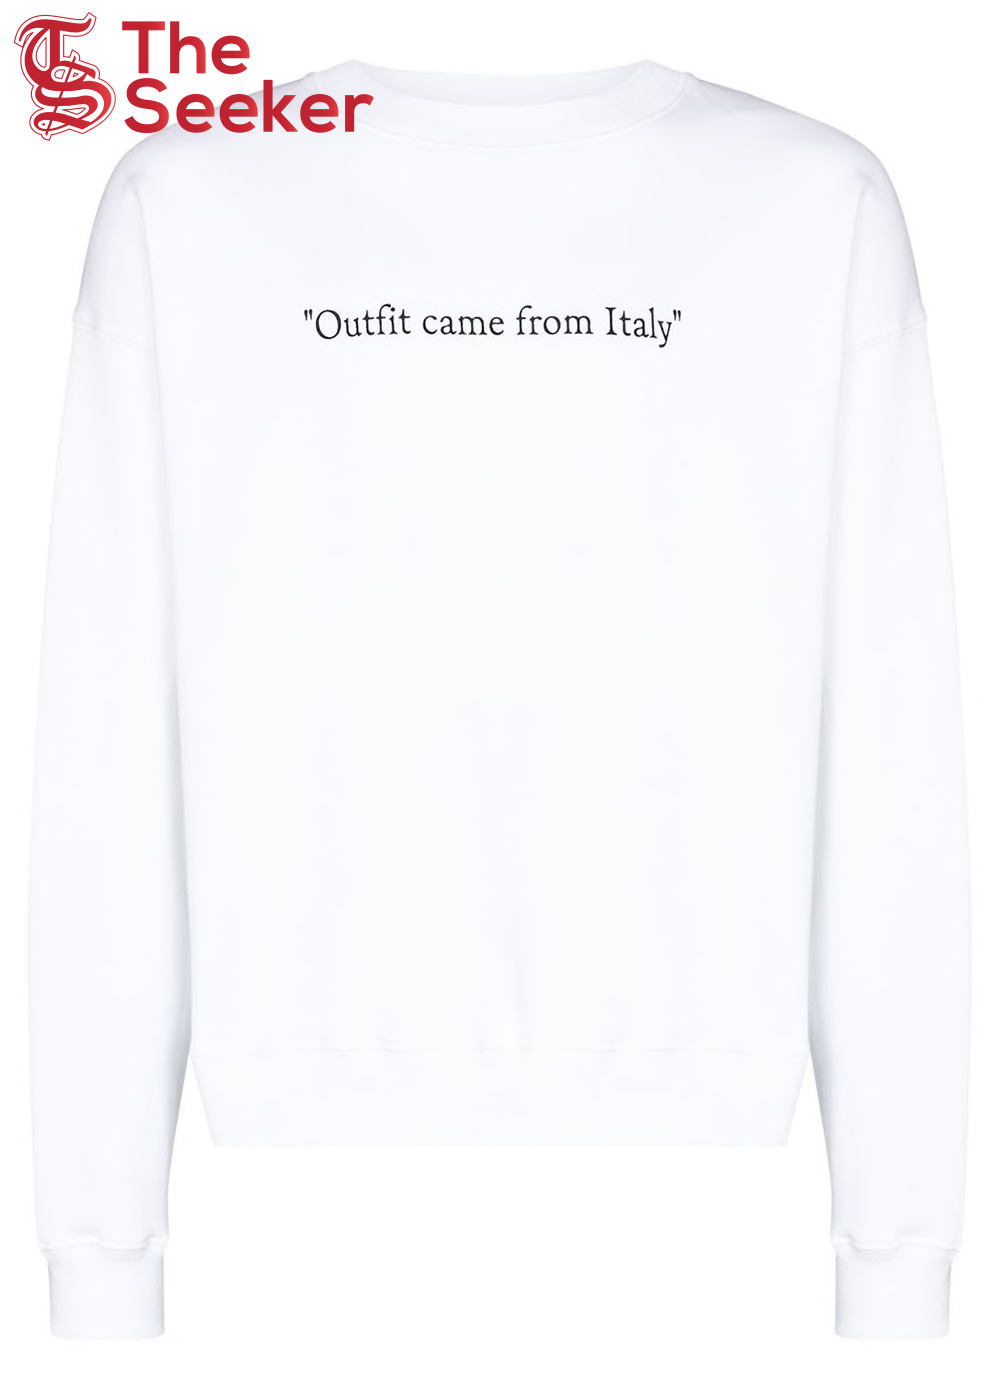 OFF-WHITE "Outfit Came From Italy" Print Crewneck White/Black